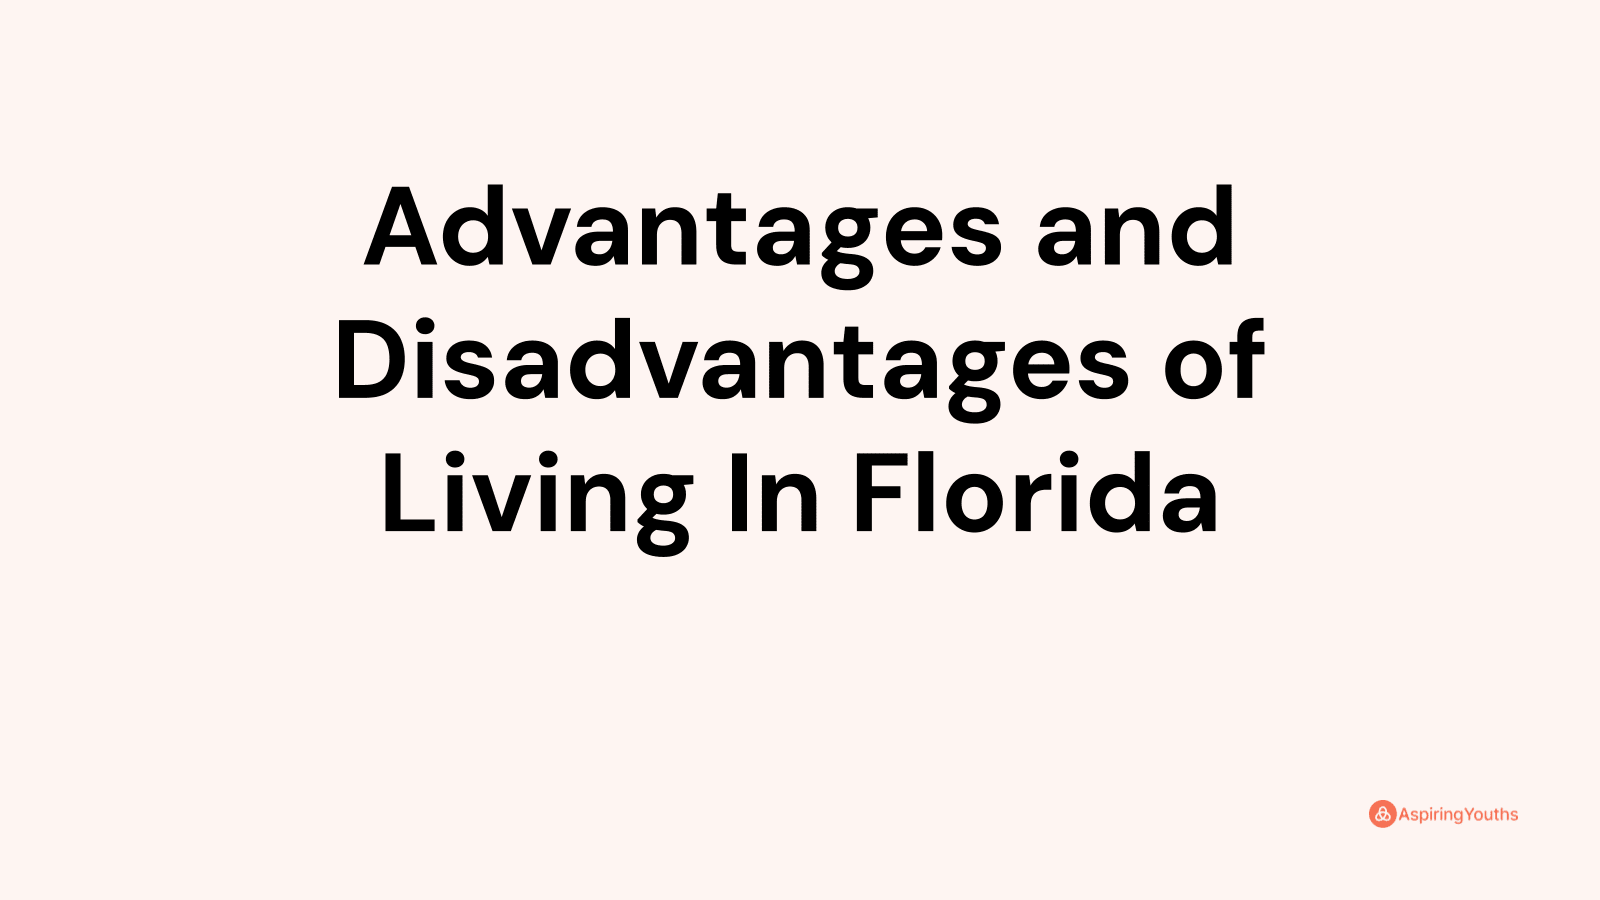 Advantages and disadvantages of Living In Florida